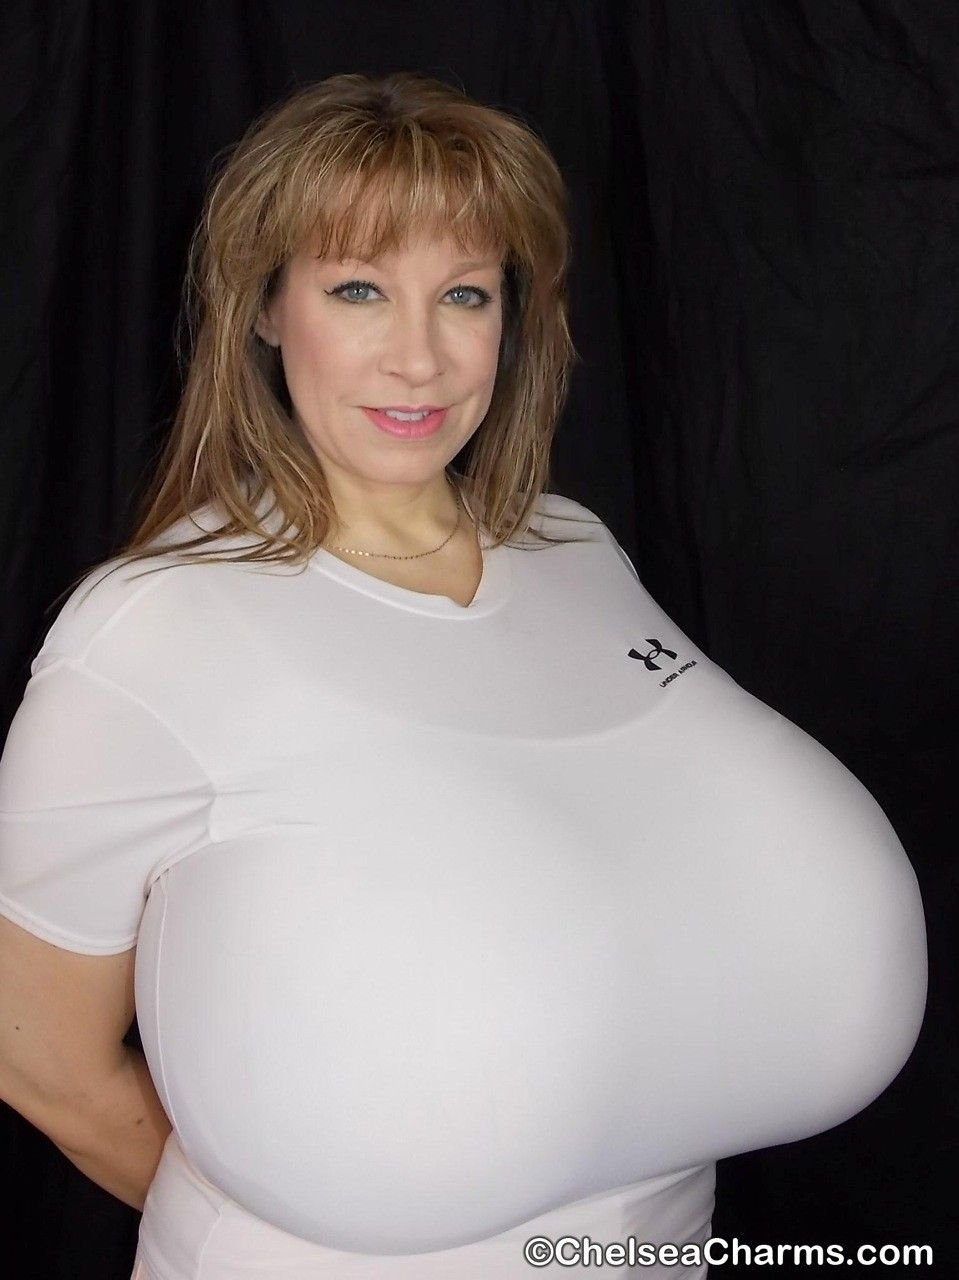 Chelsea Charms Before and After